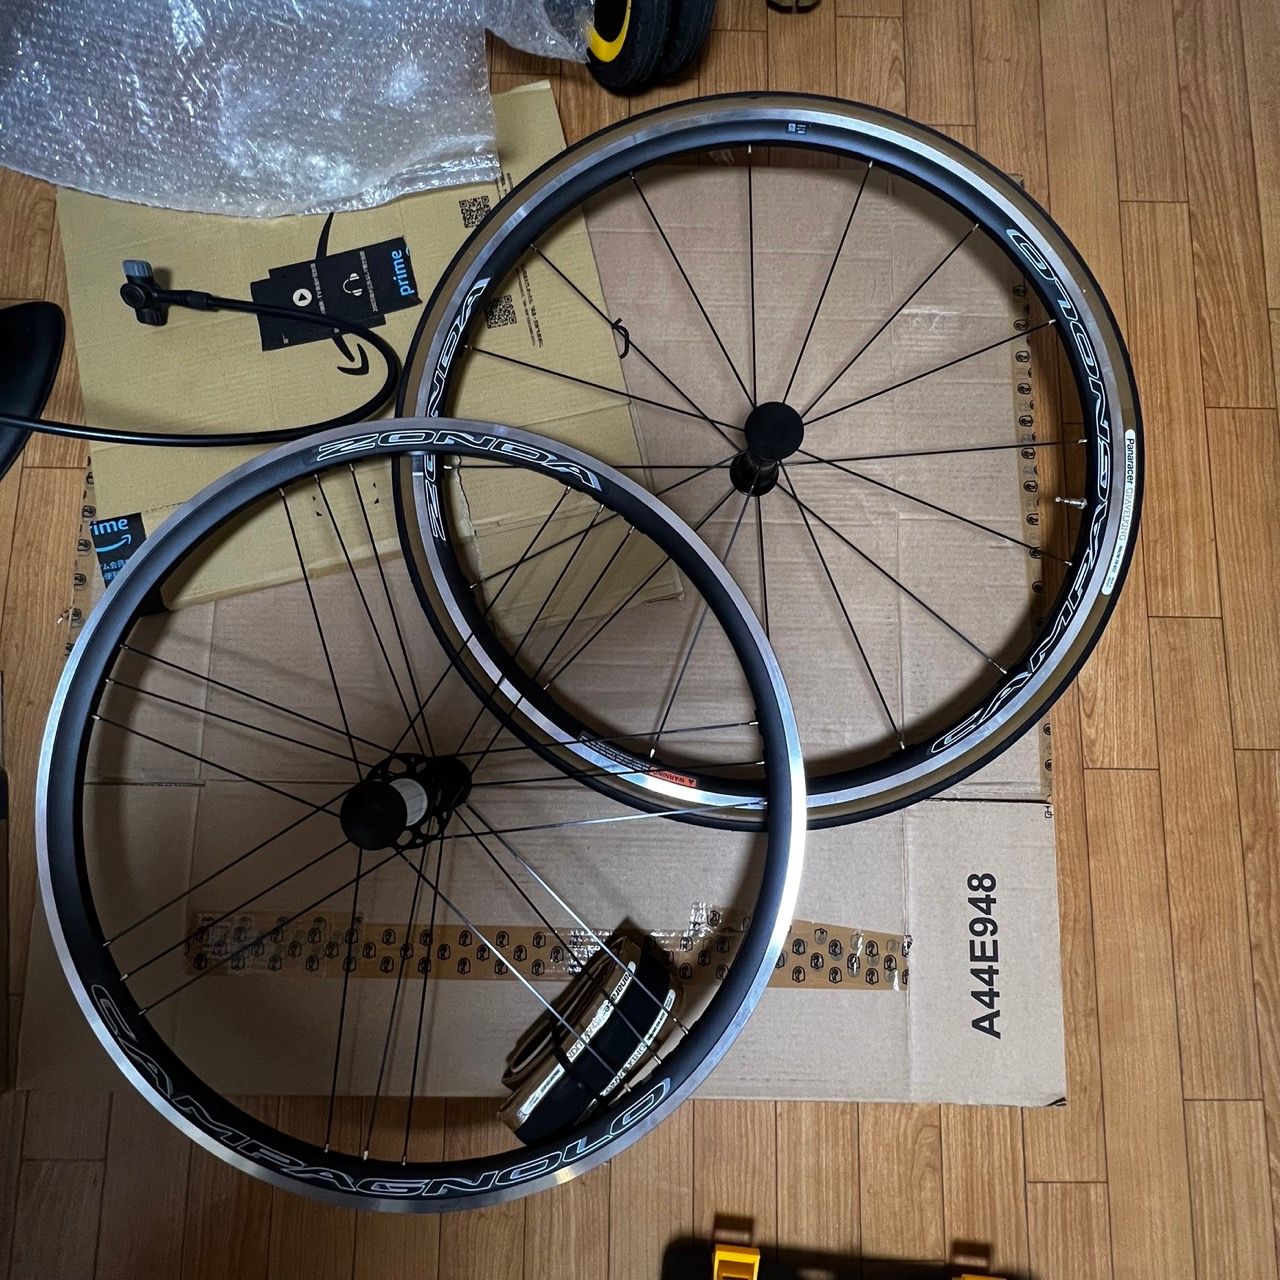 Replaced wheels and tires on a road bike (Trek 1.2 2014)